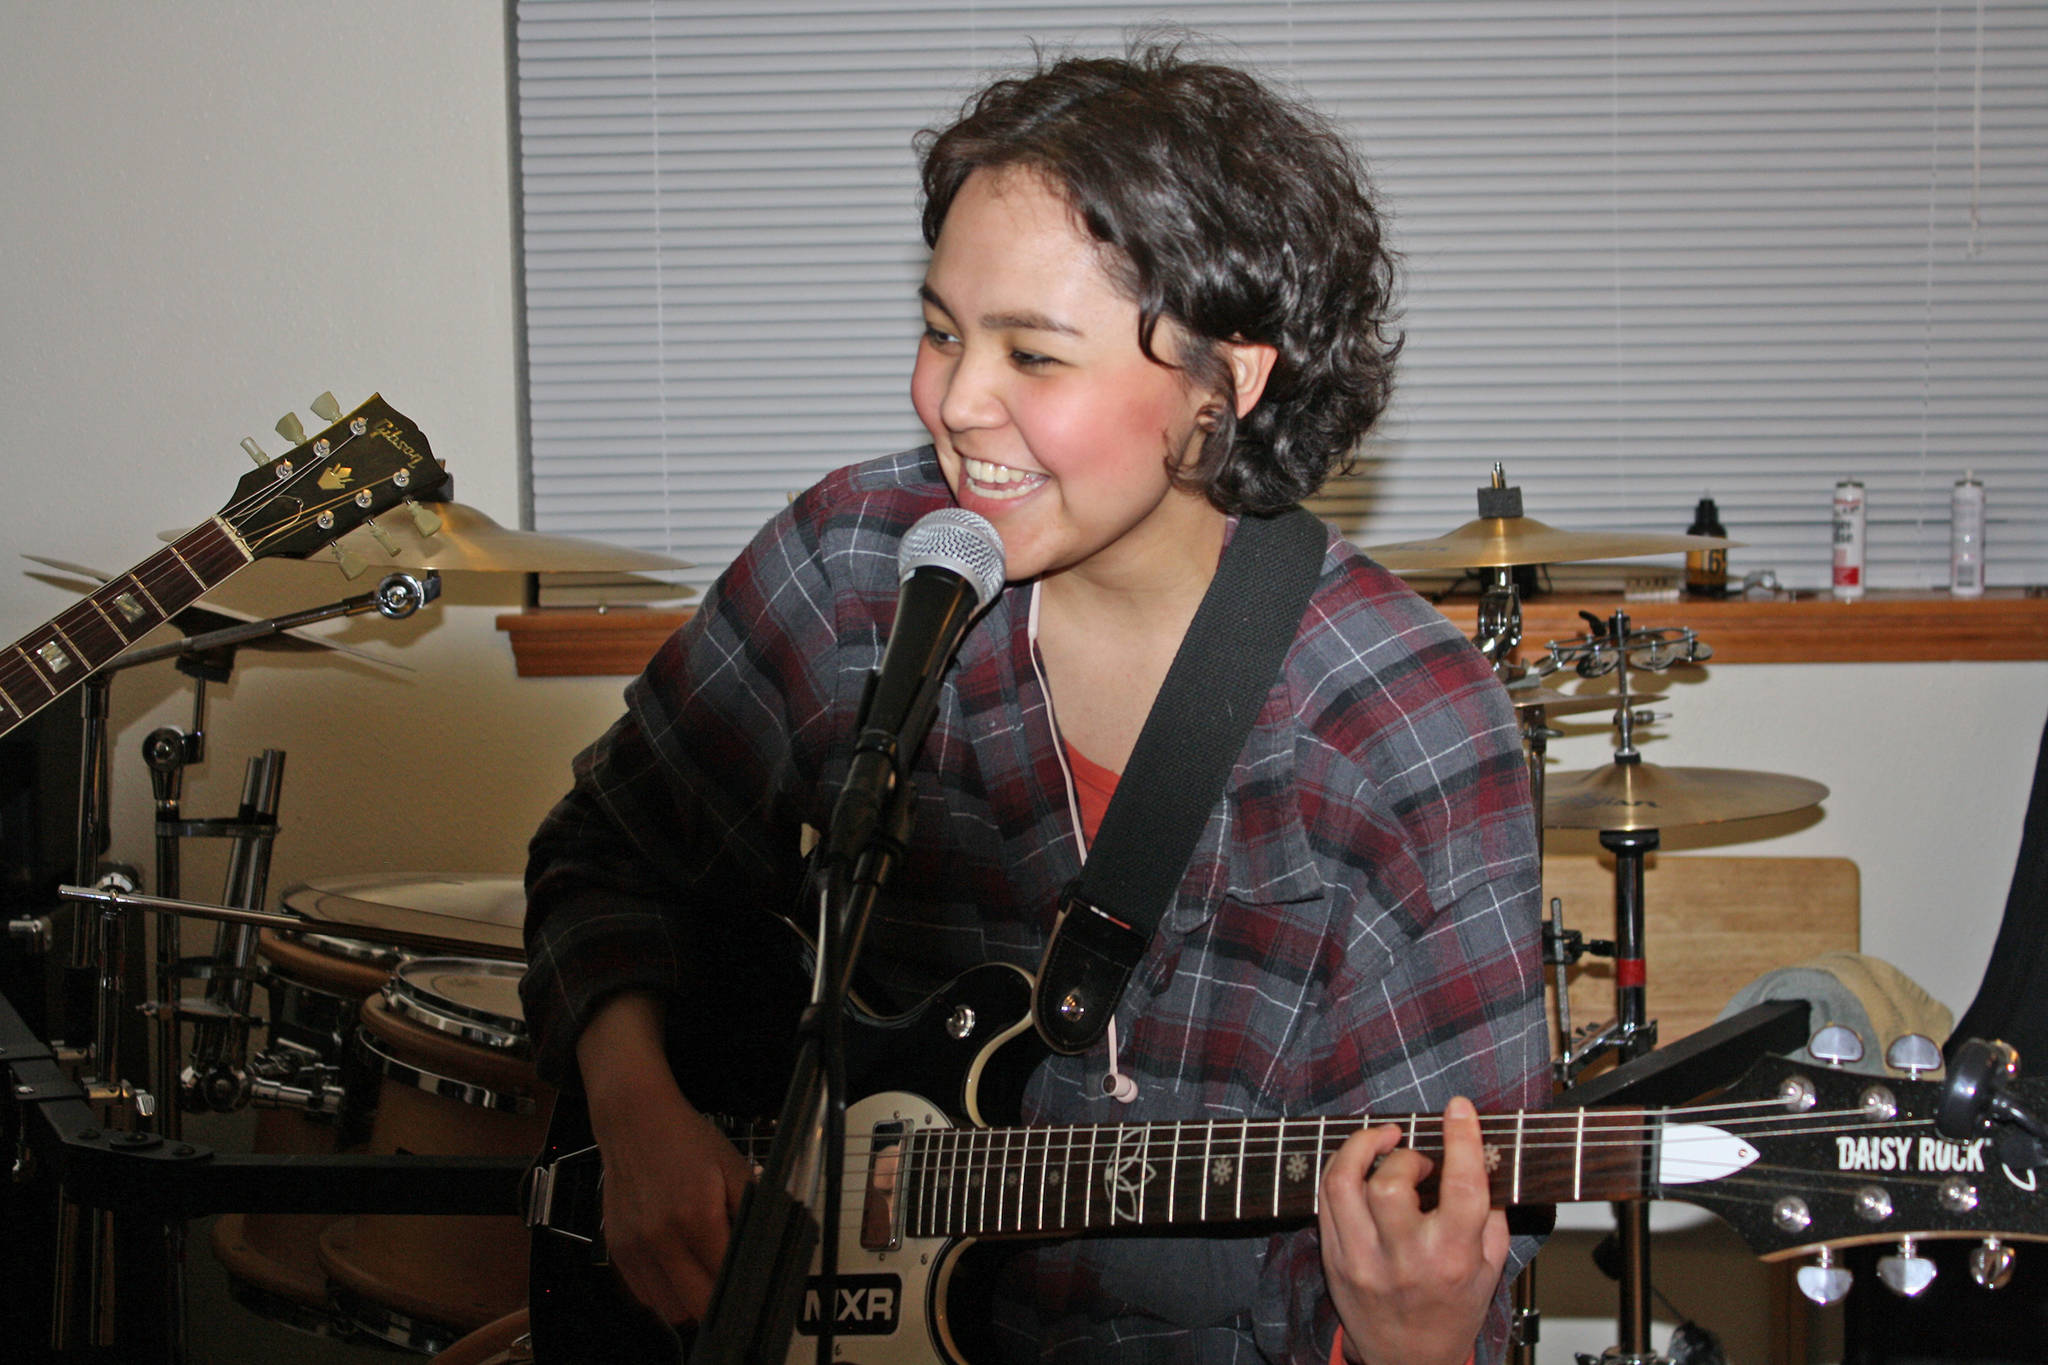 Daizy Floyd (AKA Keilani Friday) sings and plays guitar with her family’s band Garden of Agony on Wednesday, Feb. 13, 2019. (Ben Hohenenstatt | Capital City Weekly)